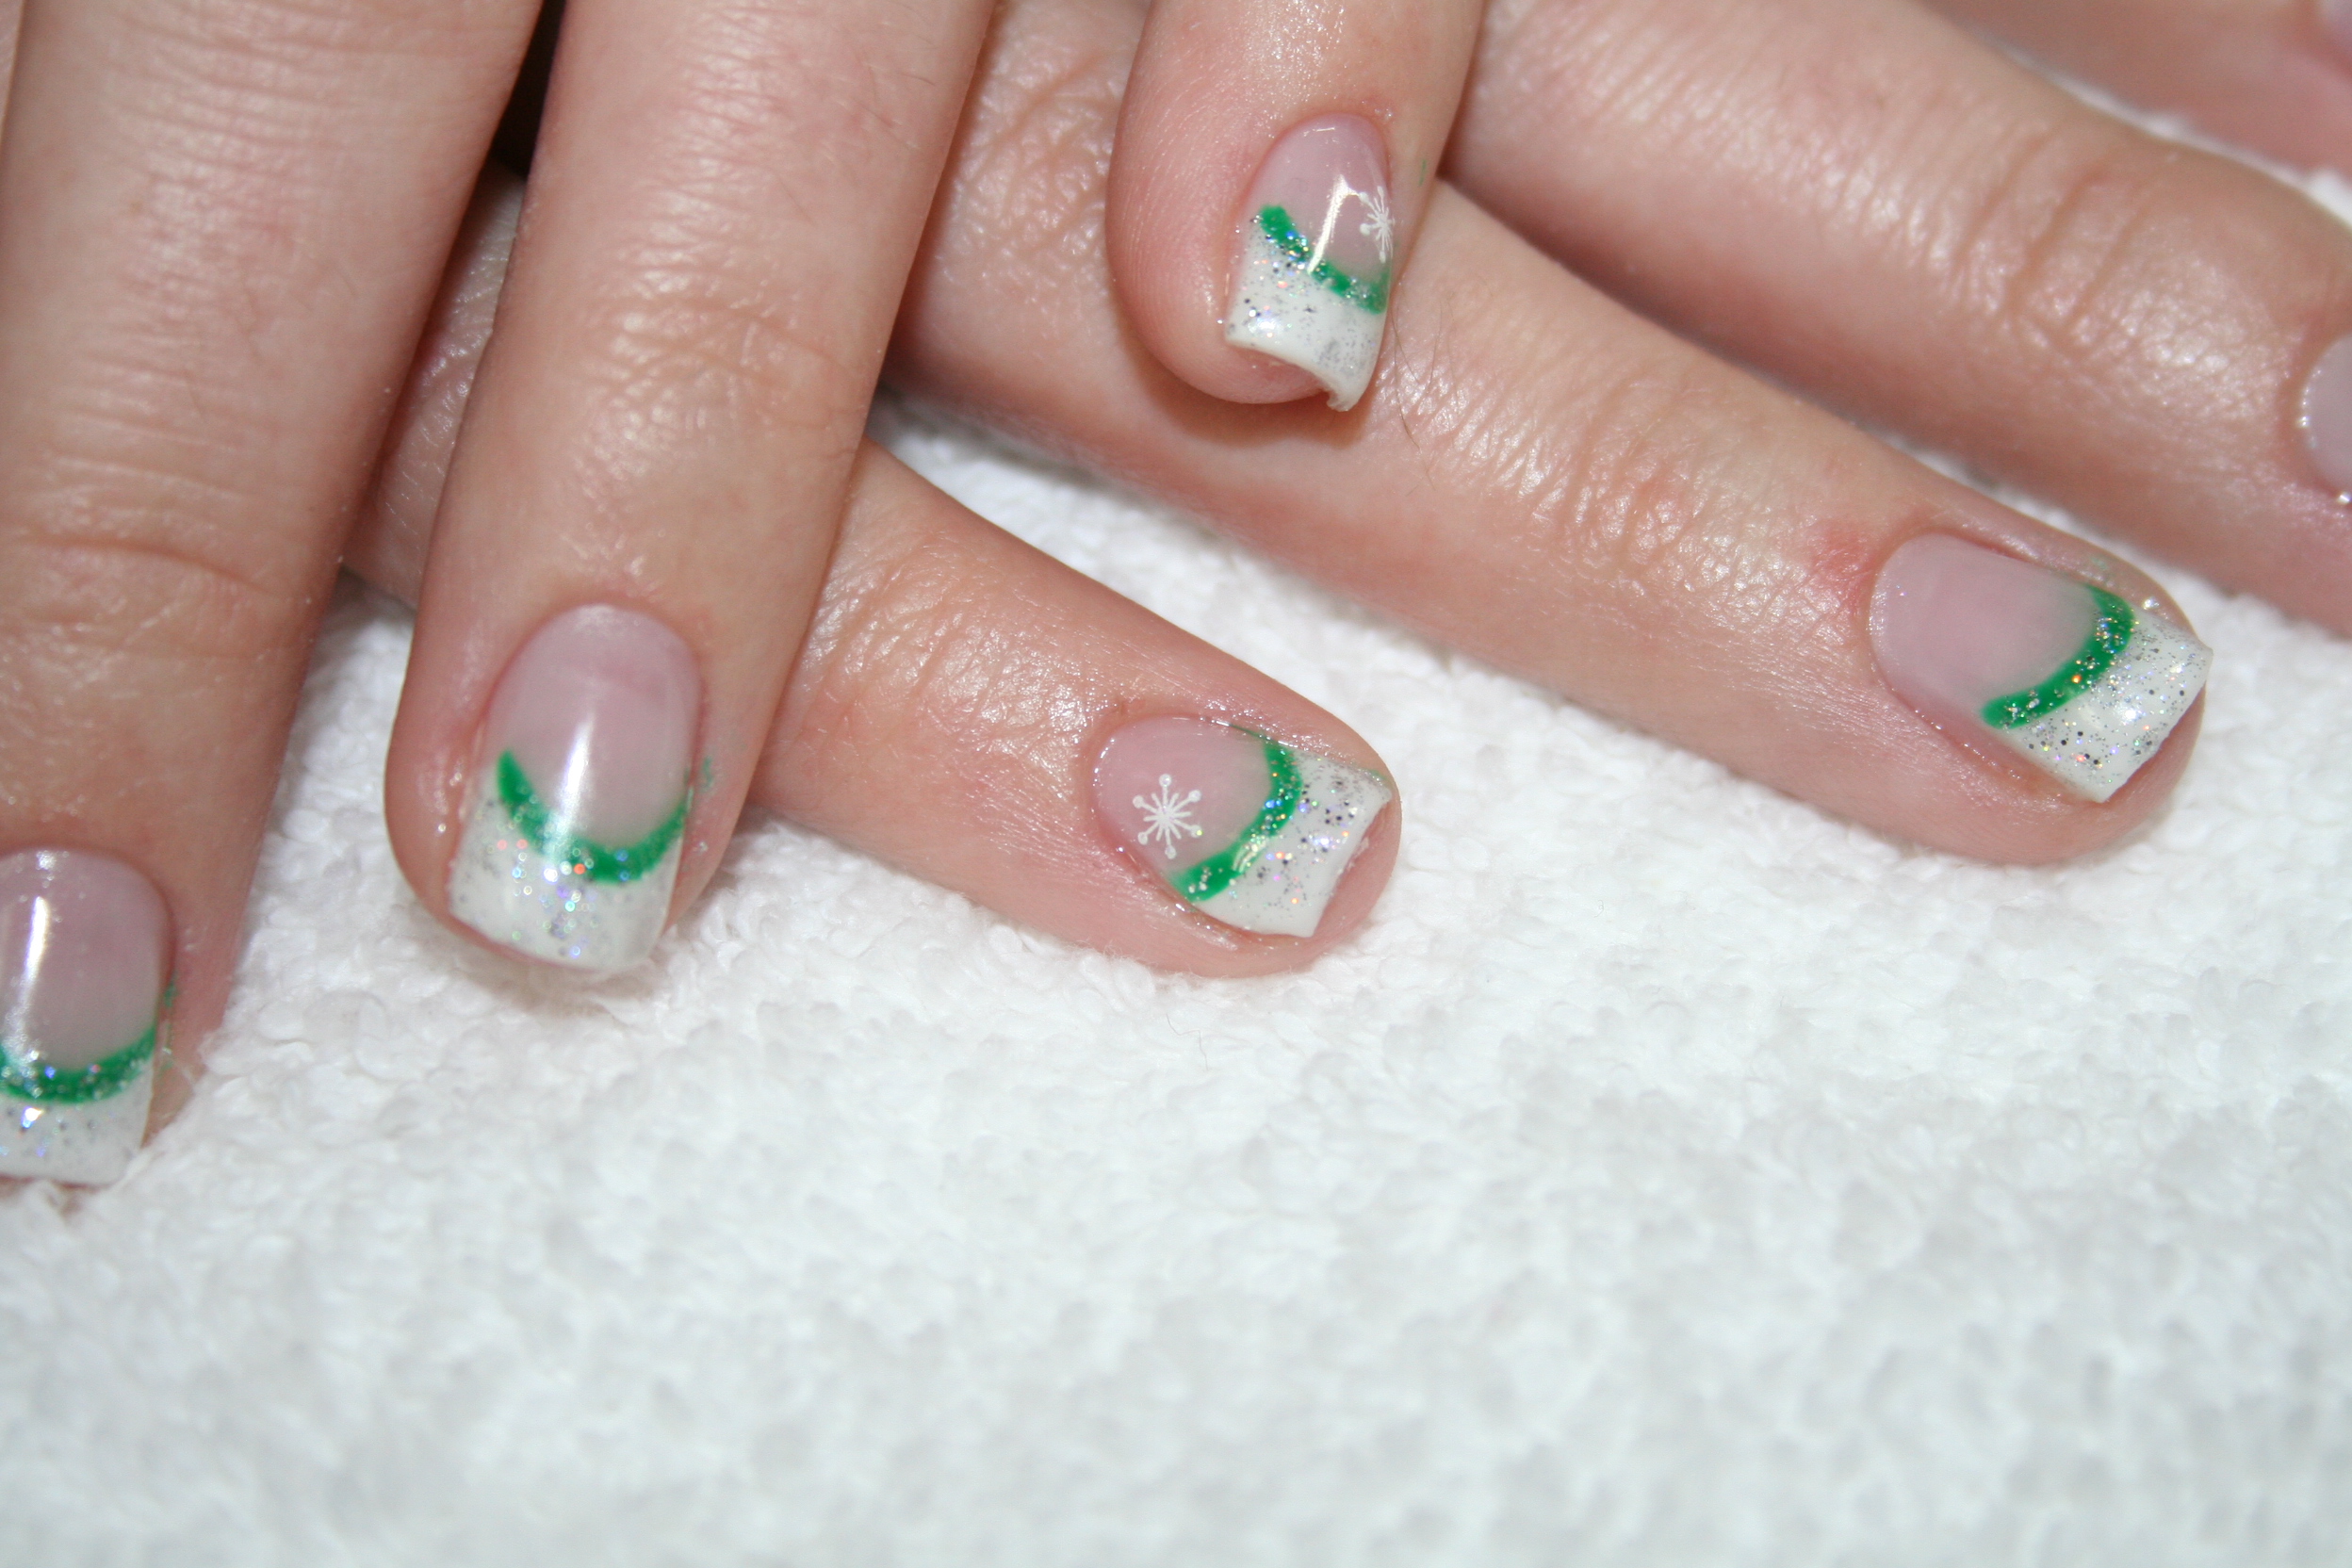 Posted in Nails with tags Christmas, Color Gel, French Tip, Gel Nails,